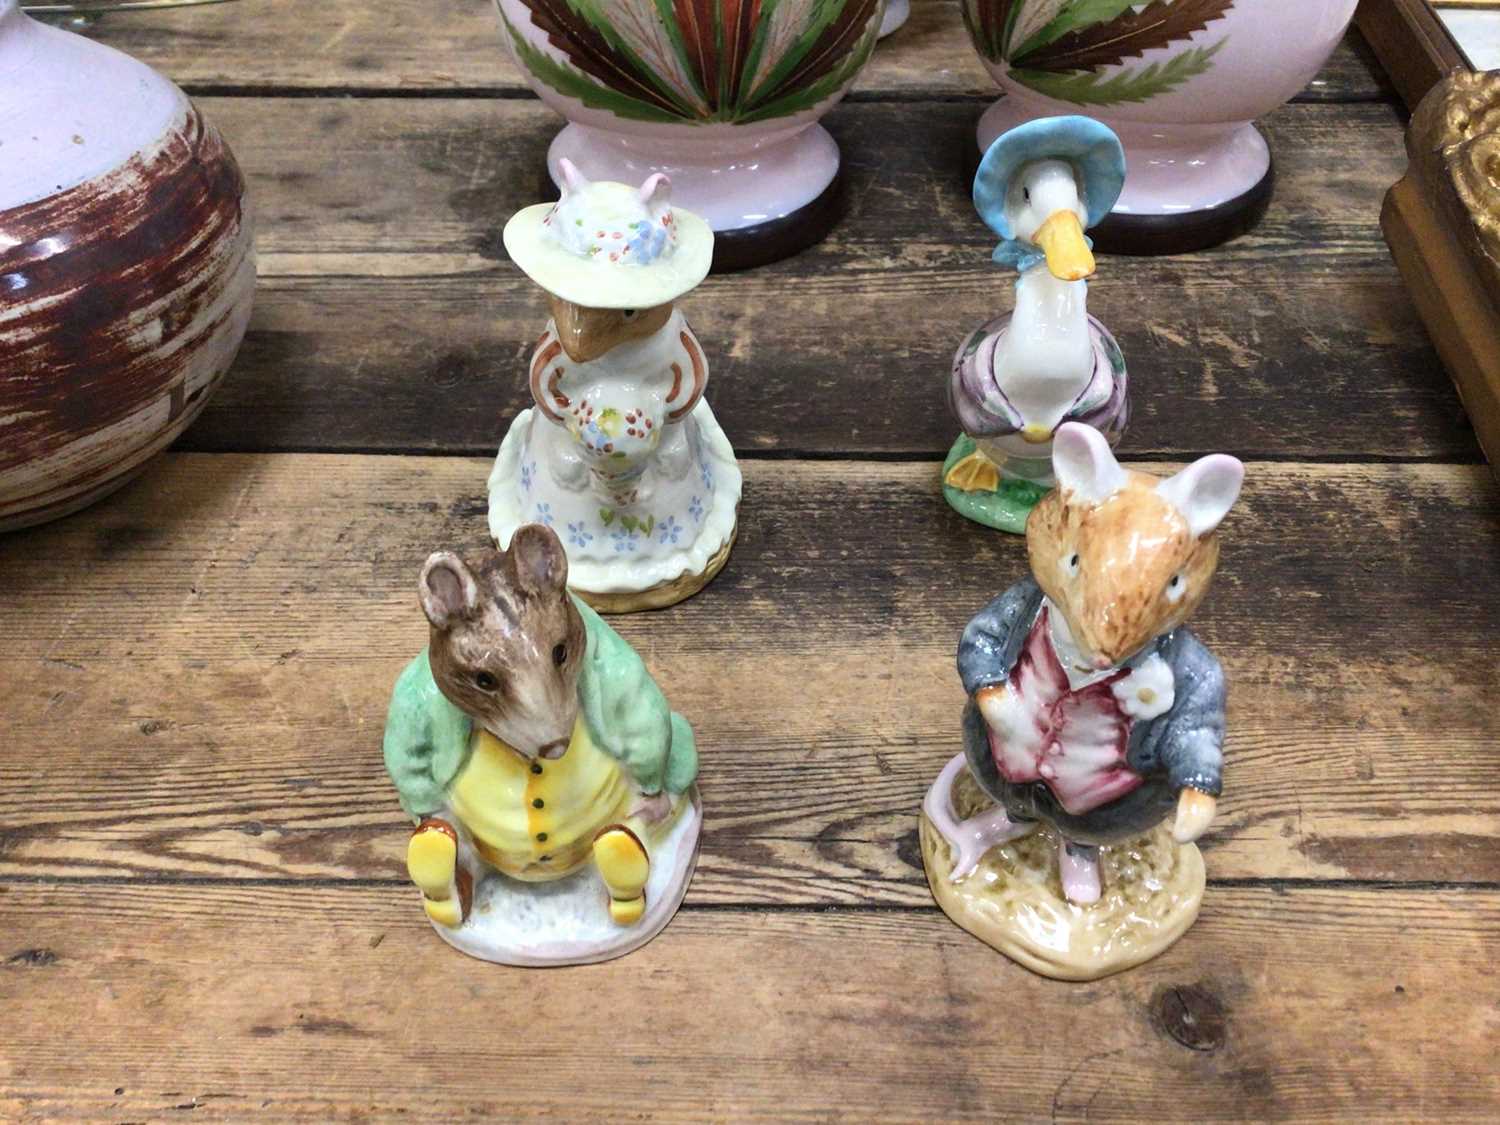 Four Beatrix Potter figures, including two Beswick and two Royal Doulton